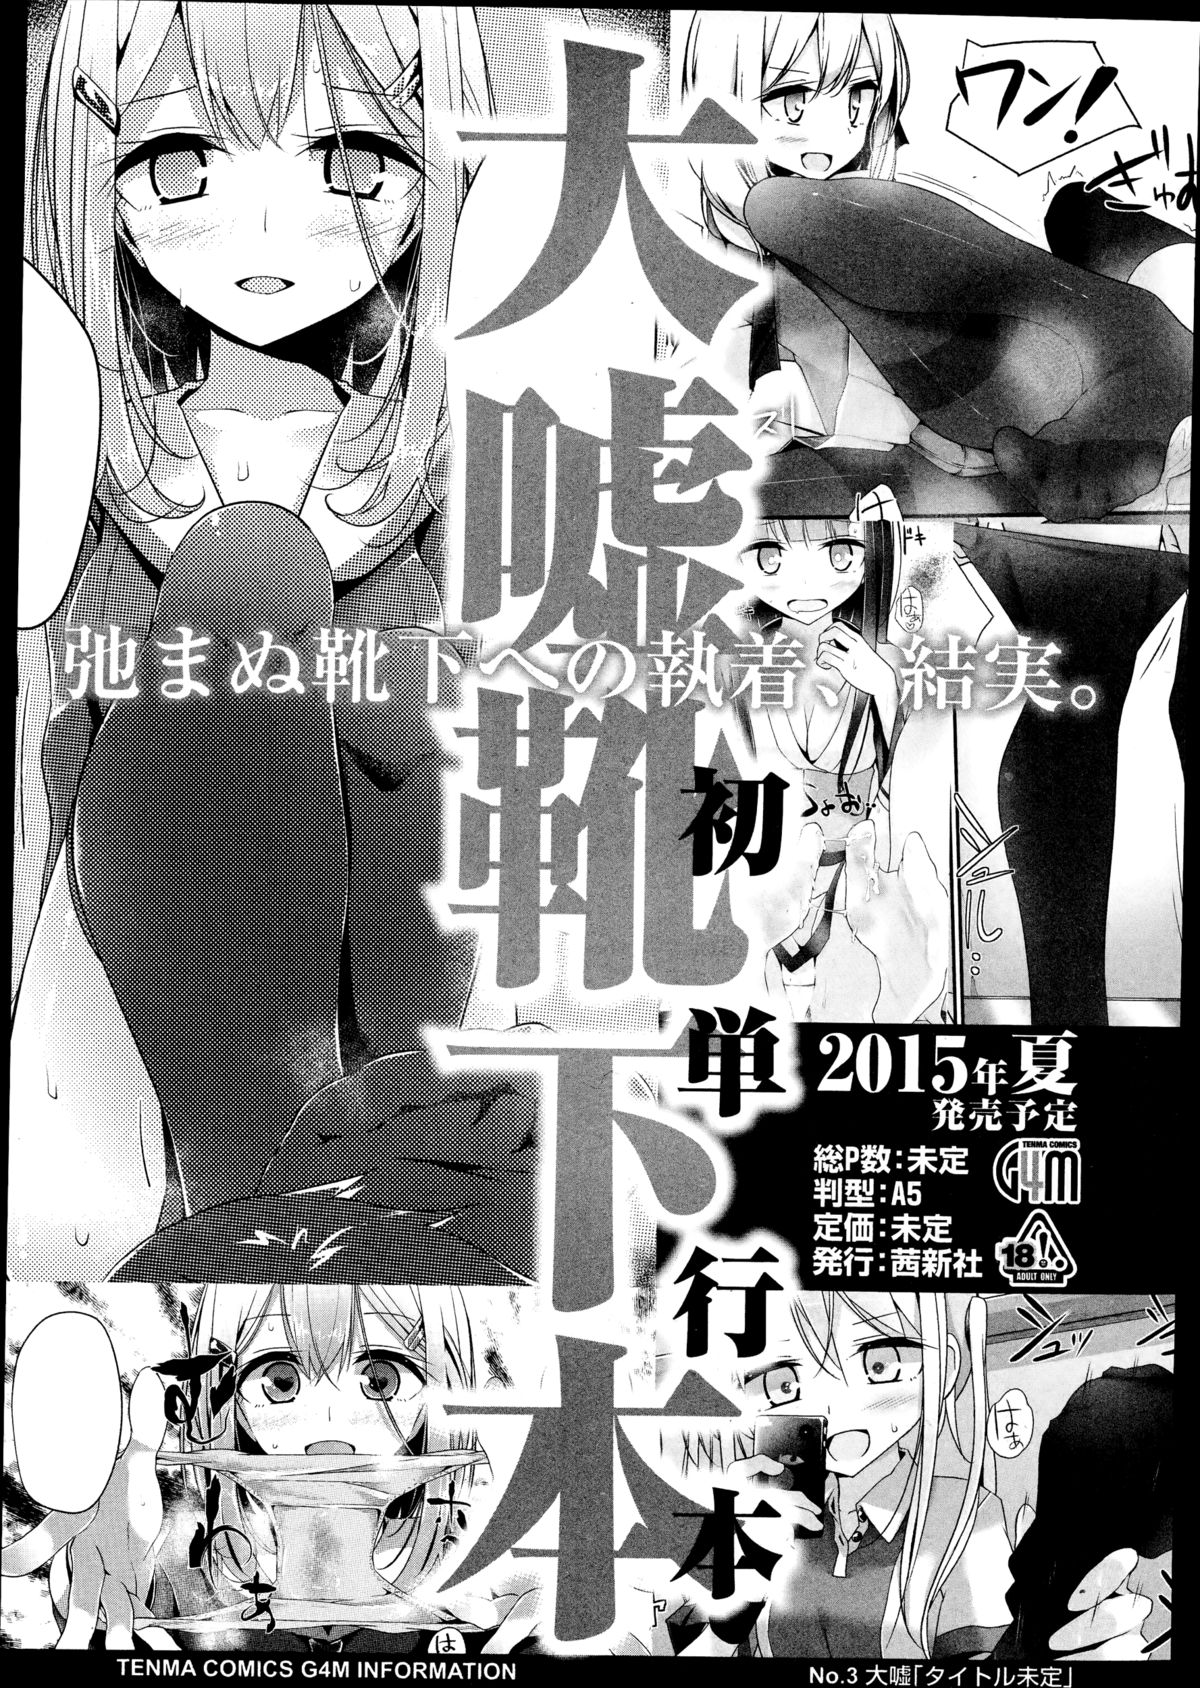 Girls forM Vol. 08 page 45 full